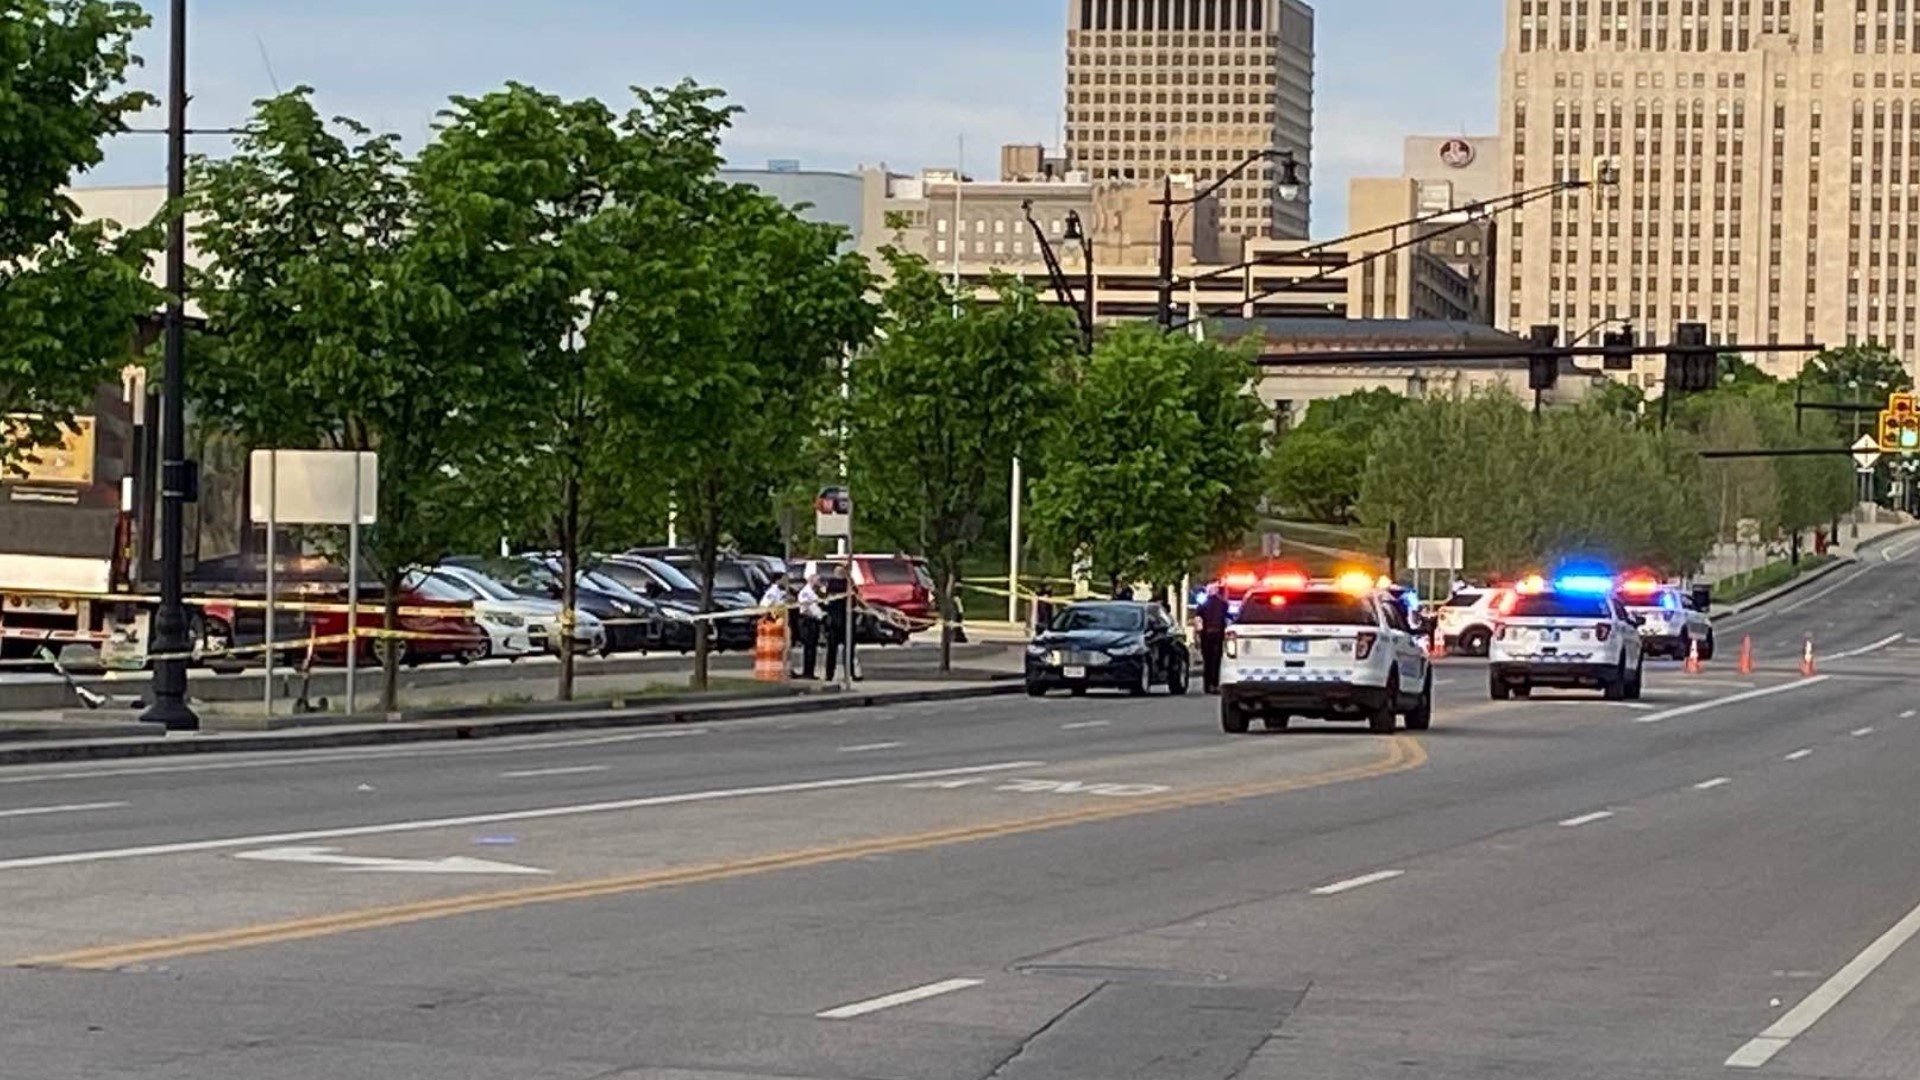 Police dispatchers said they received reports of shots fired near Genoa Park and the National Veterans Memorial and Museum around 7 p.m. Sunday